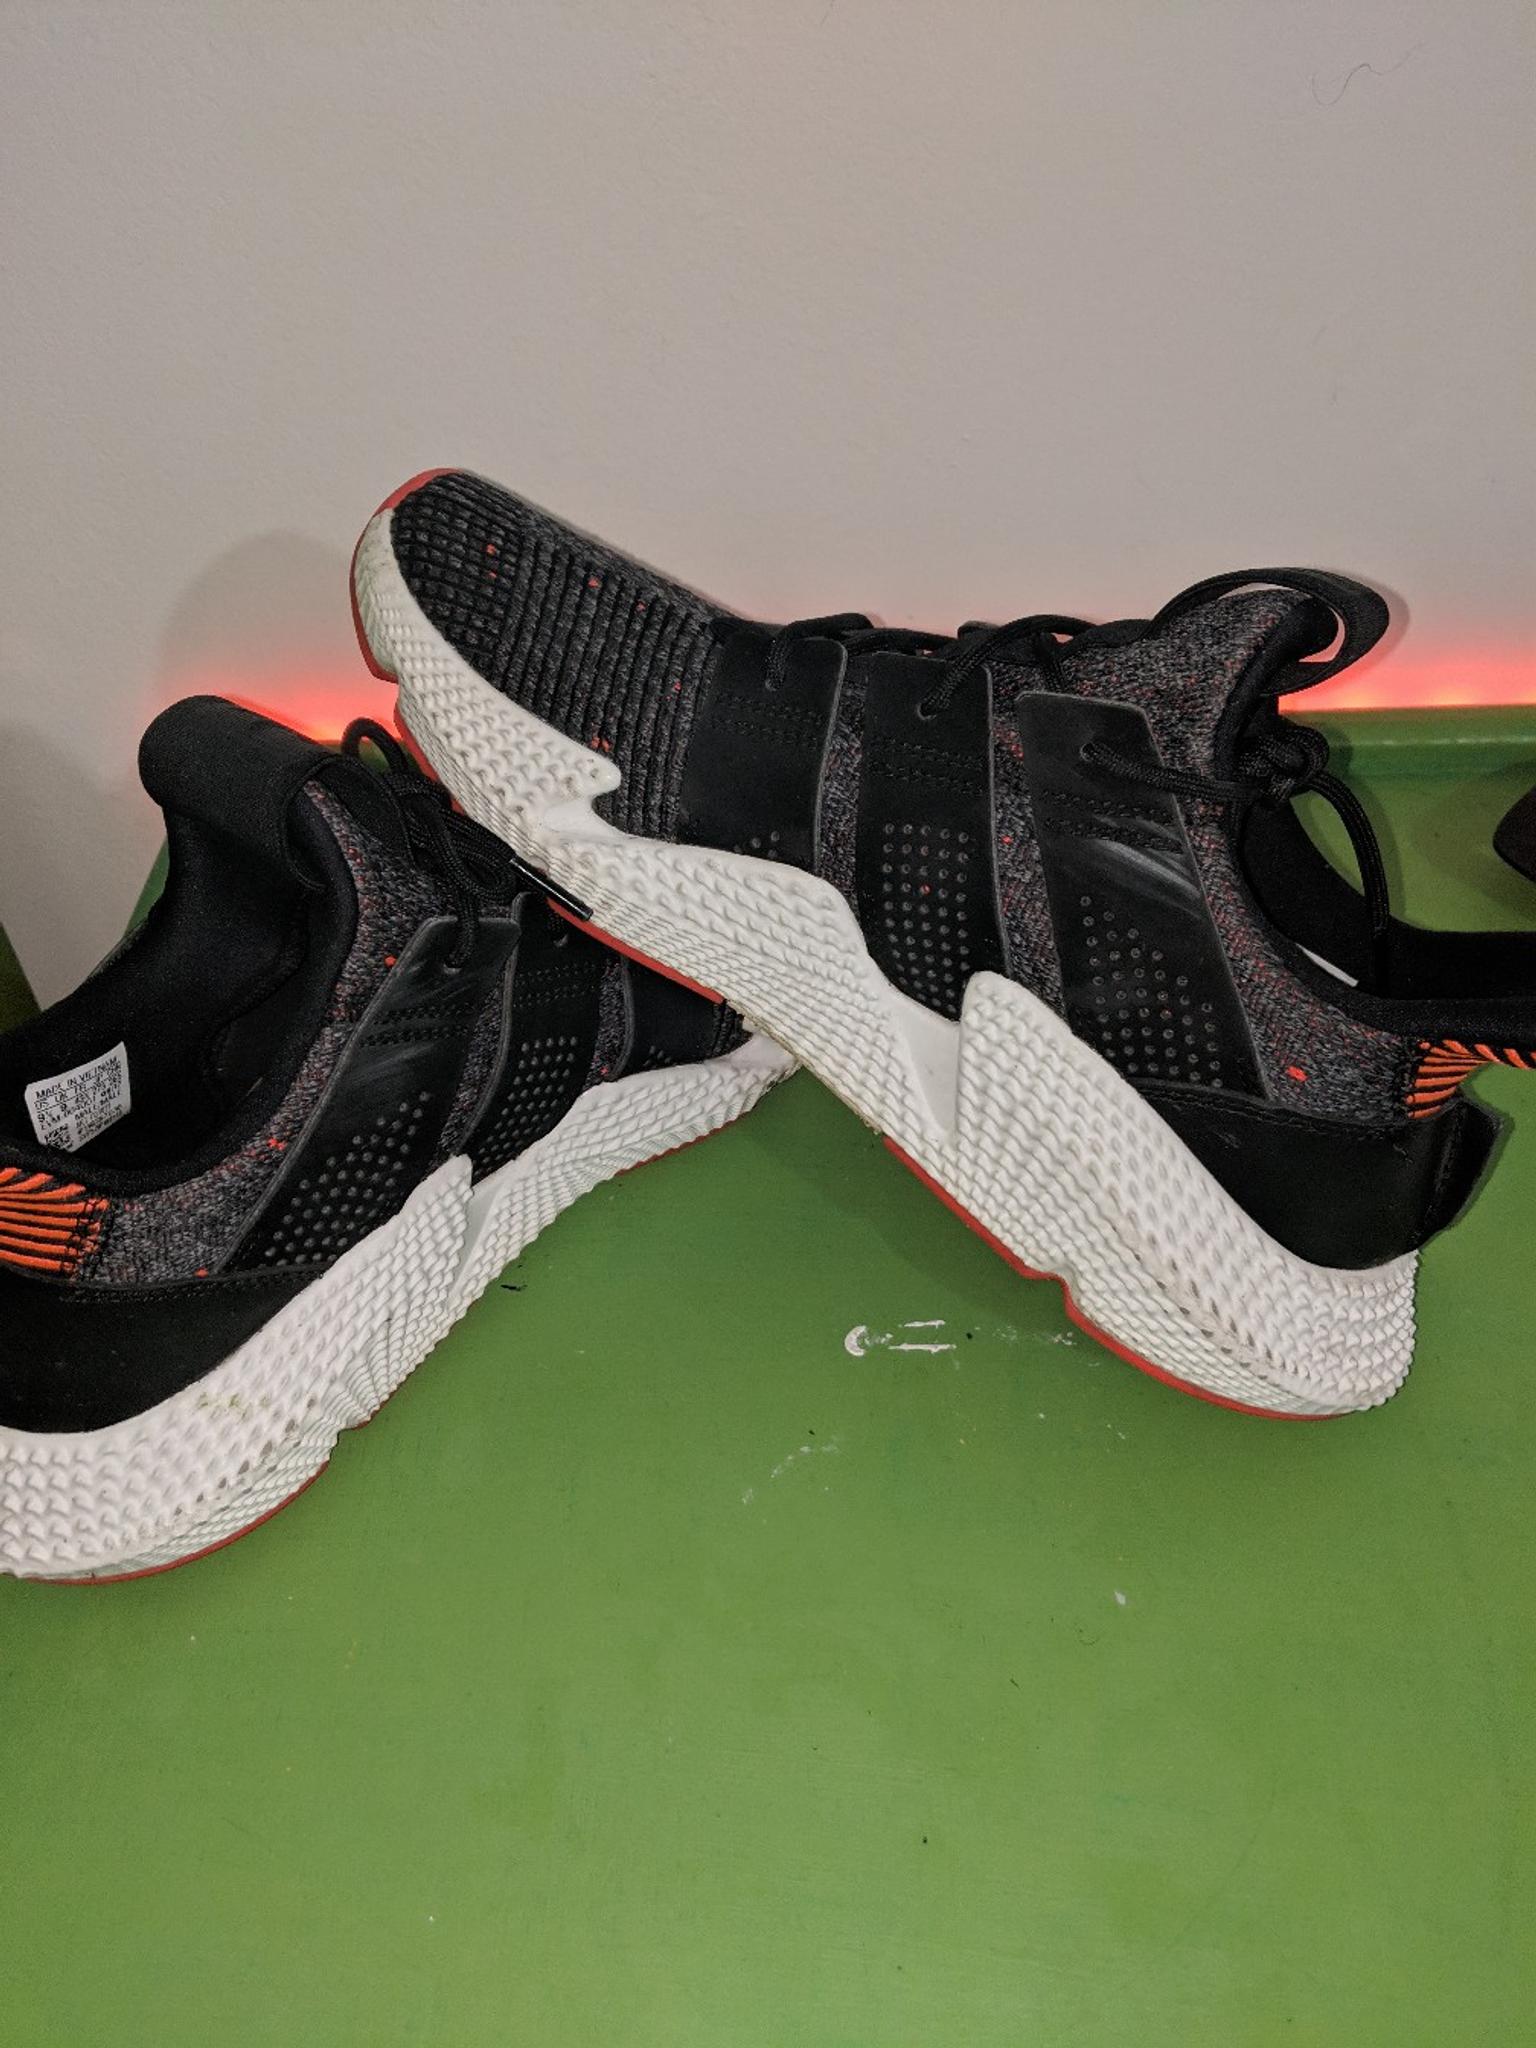 adidas prophere size 9